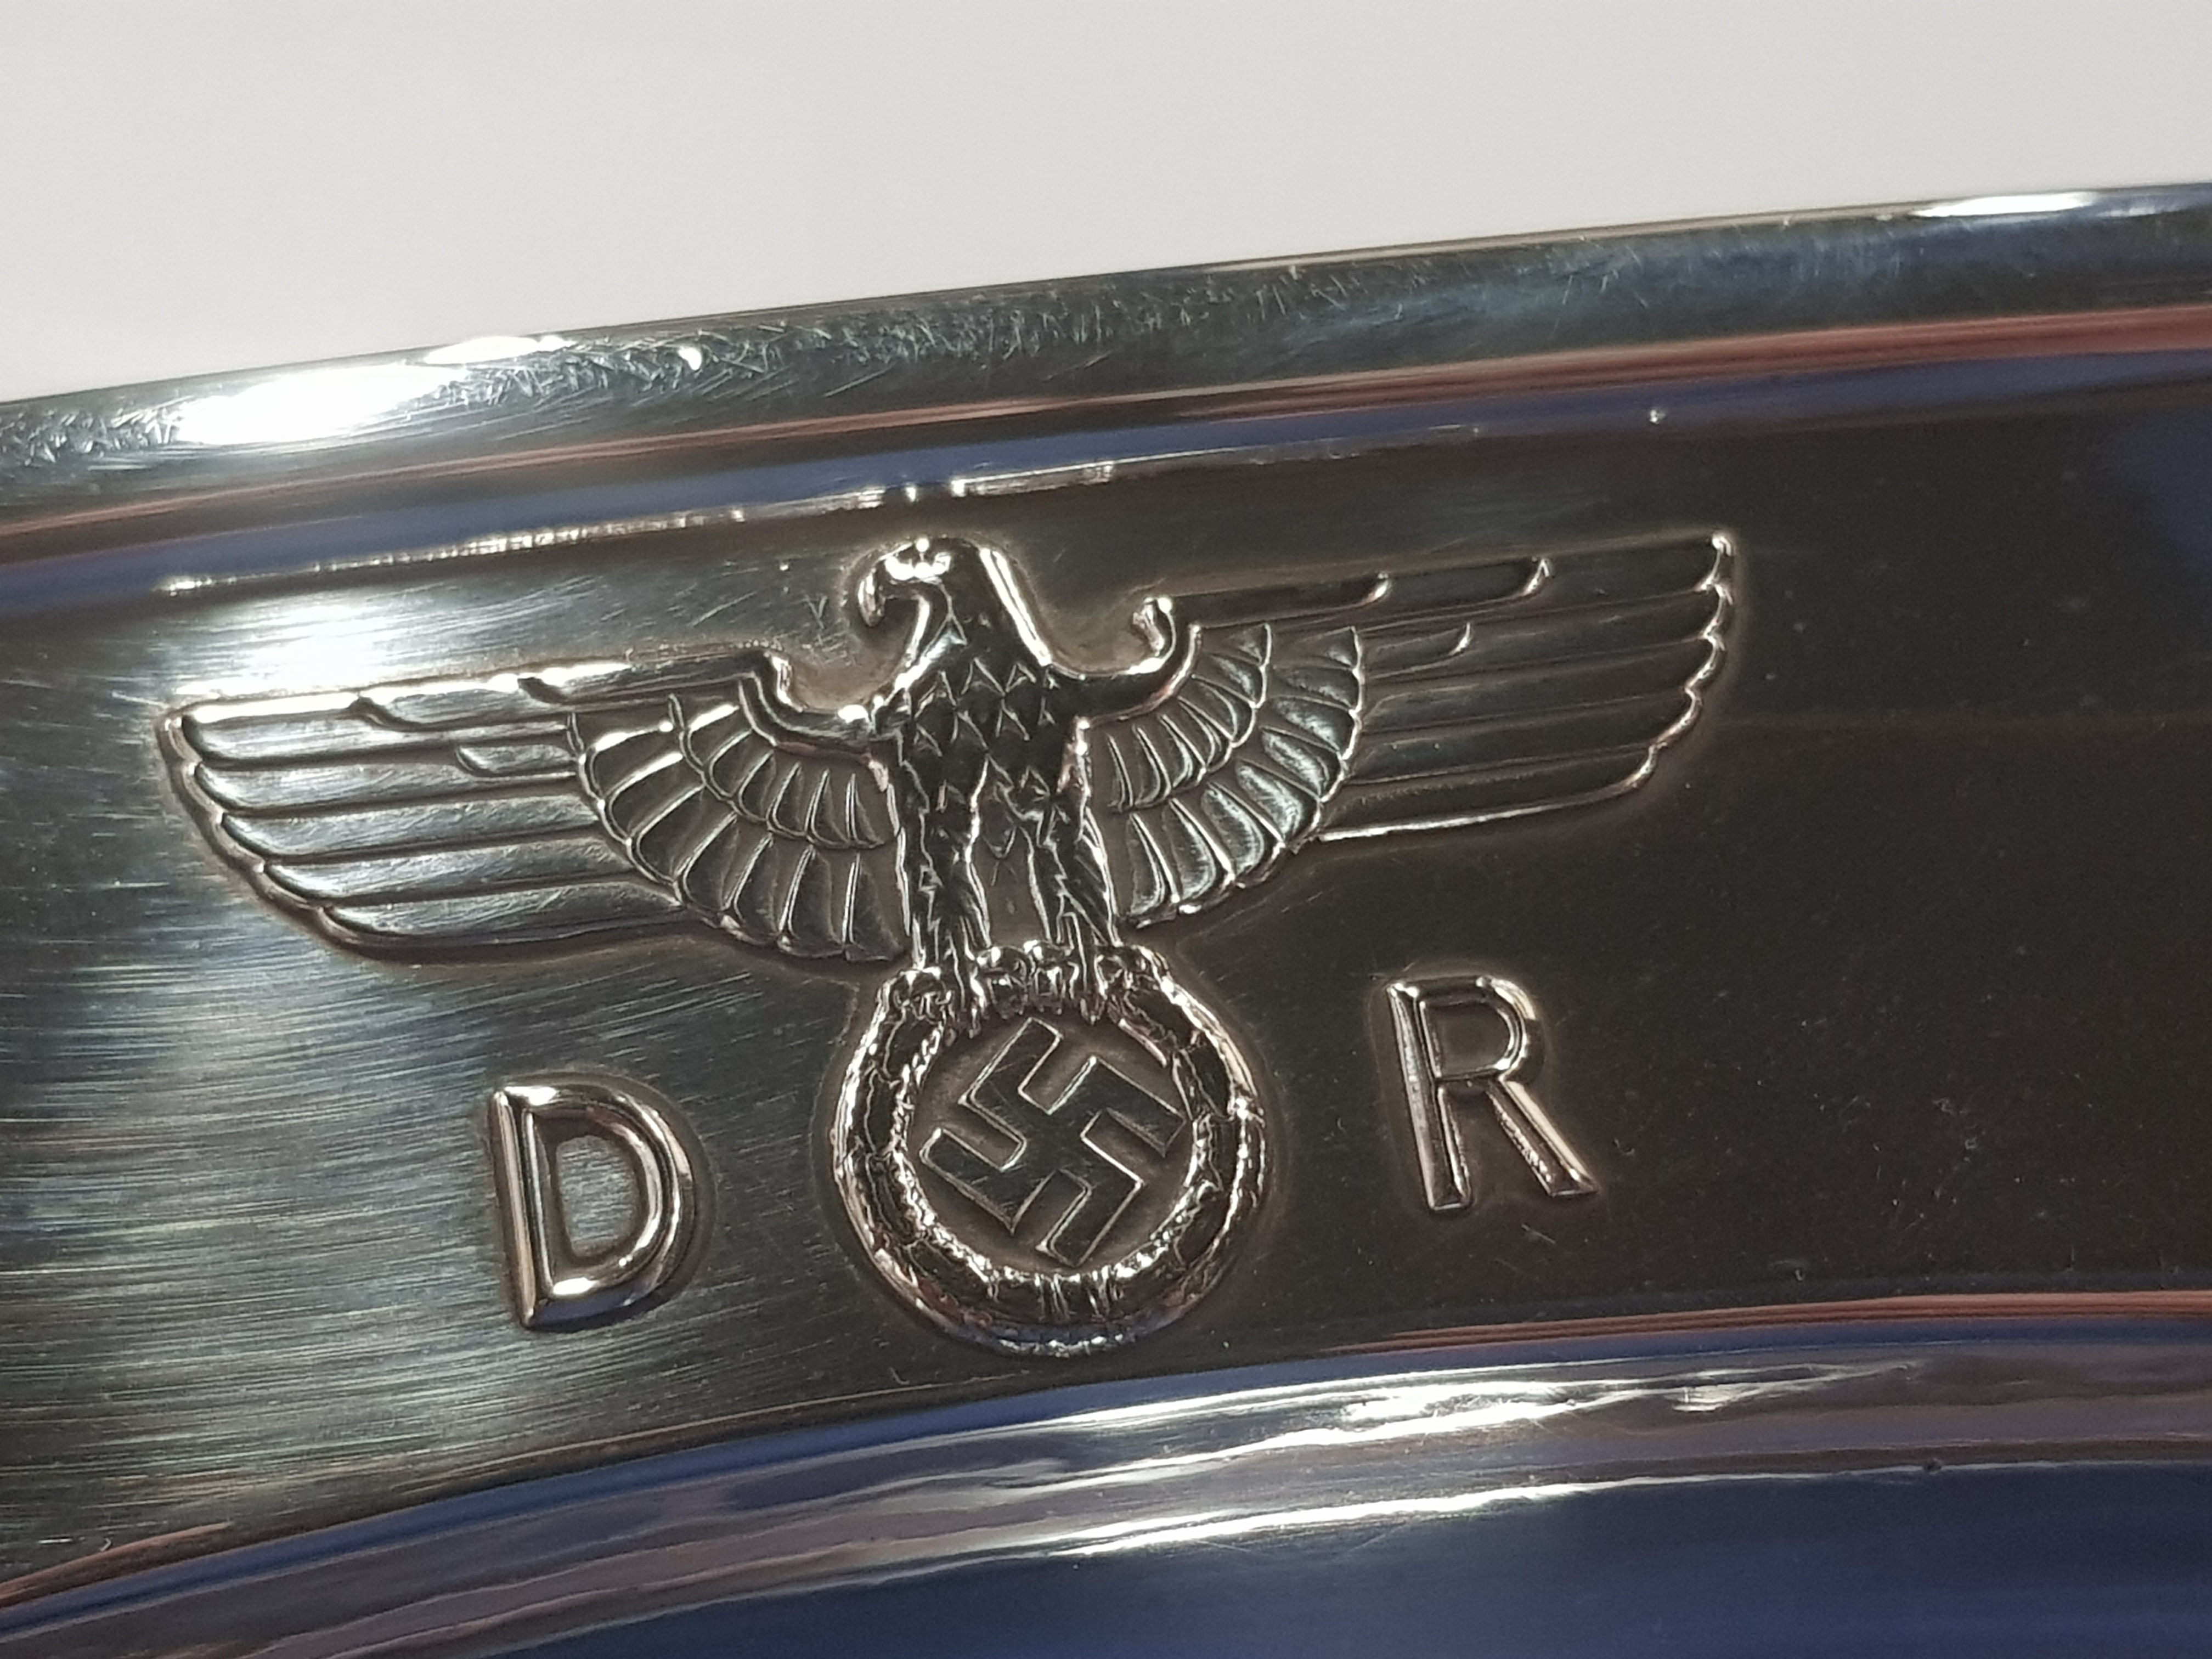 DEUTSCHE REICHSBAHN LARGE OVAL SERVING TRAY FROM ADOLF HITLER'S EXECUTIVE DINING WAGON 10 '242' - Image 3 of 6